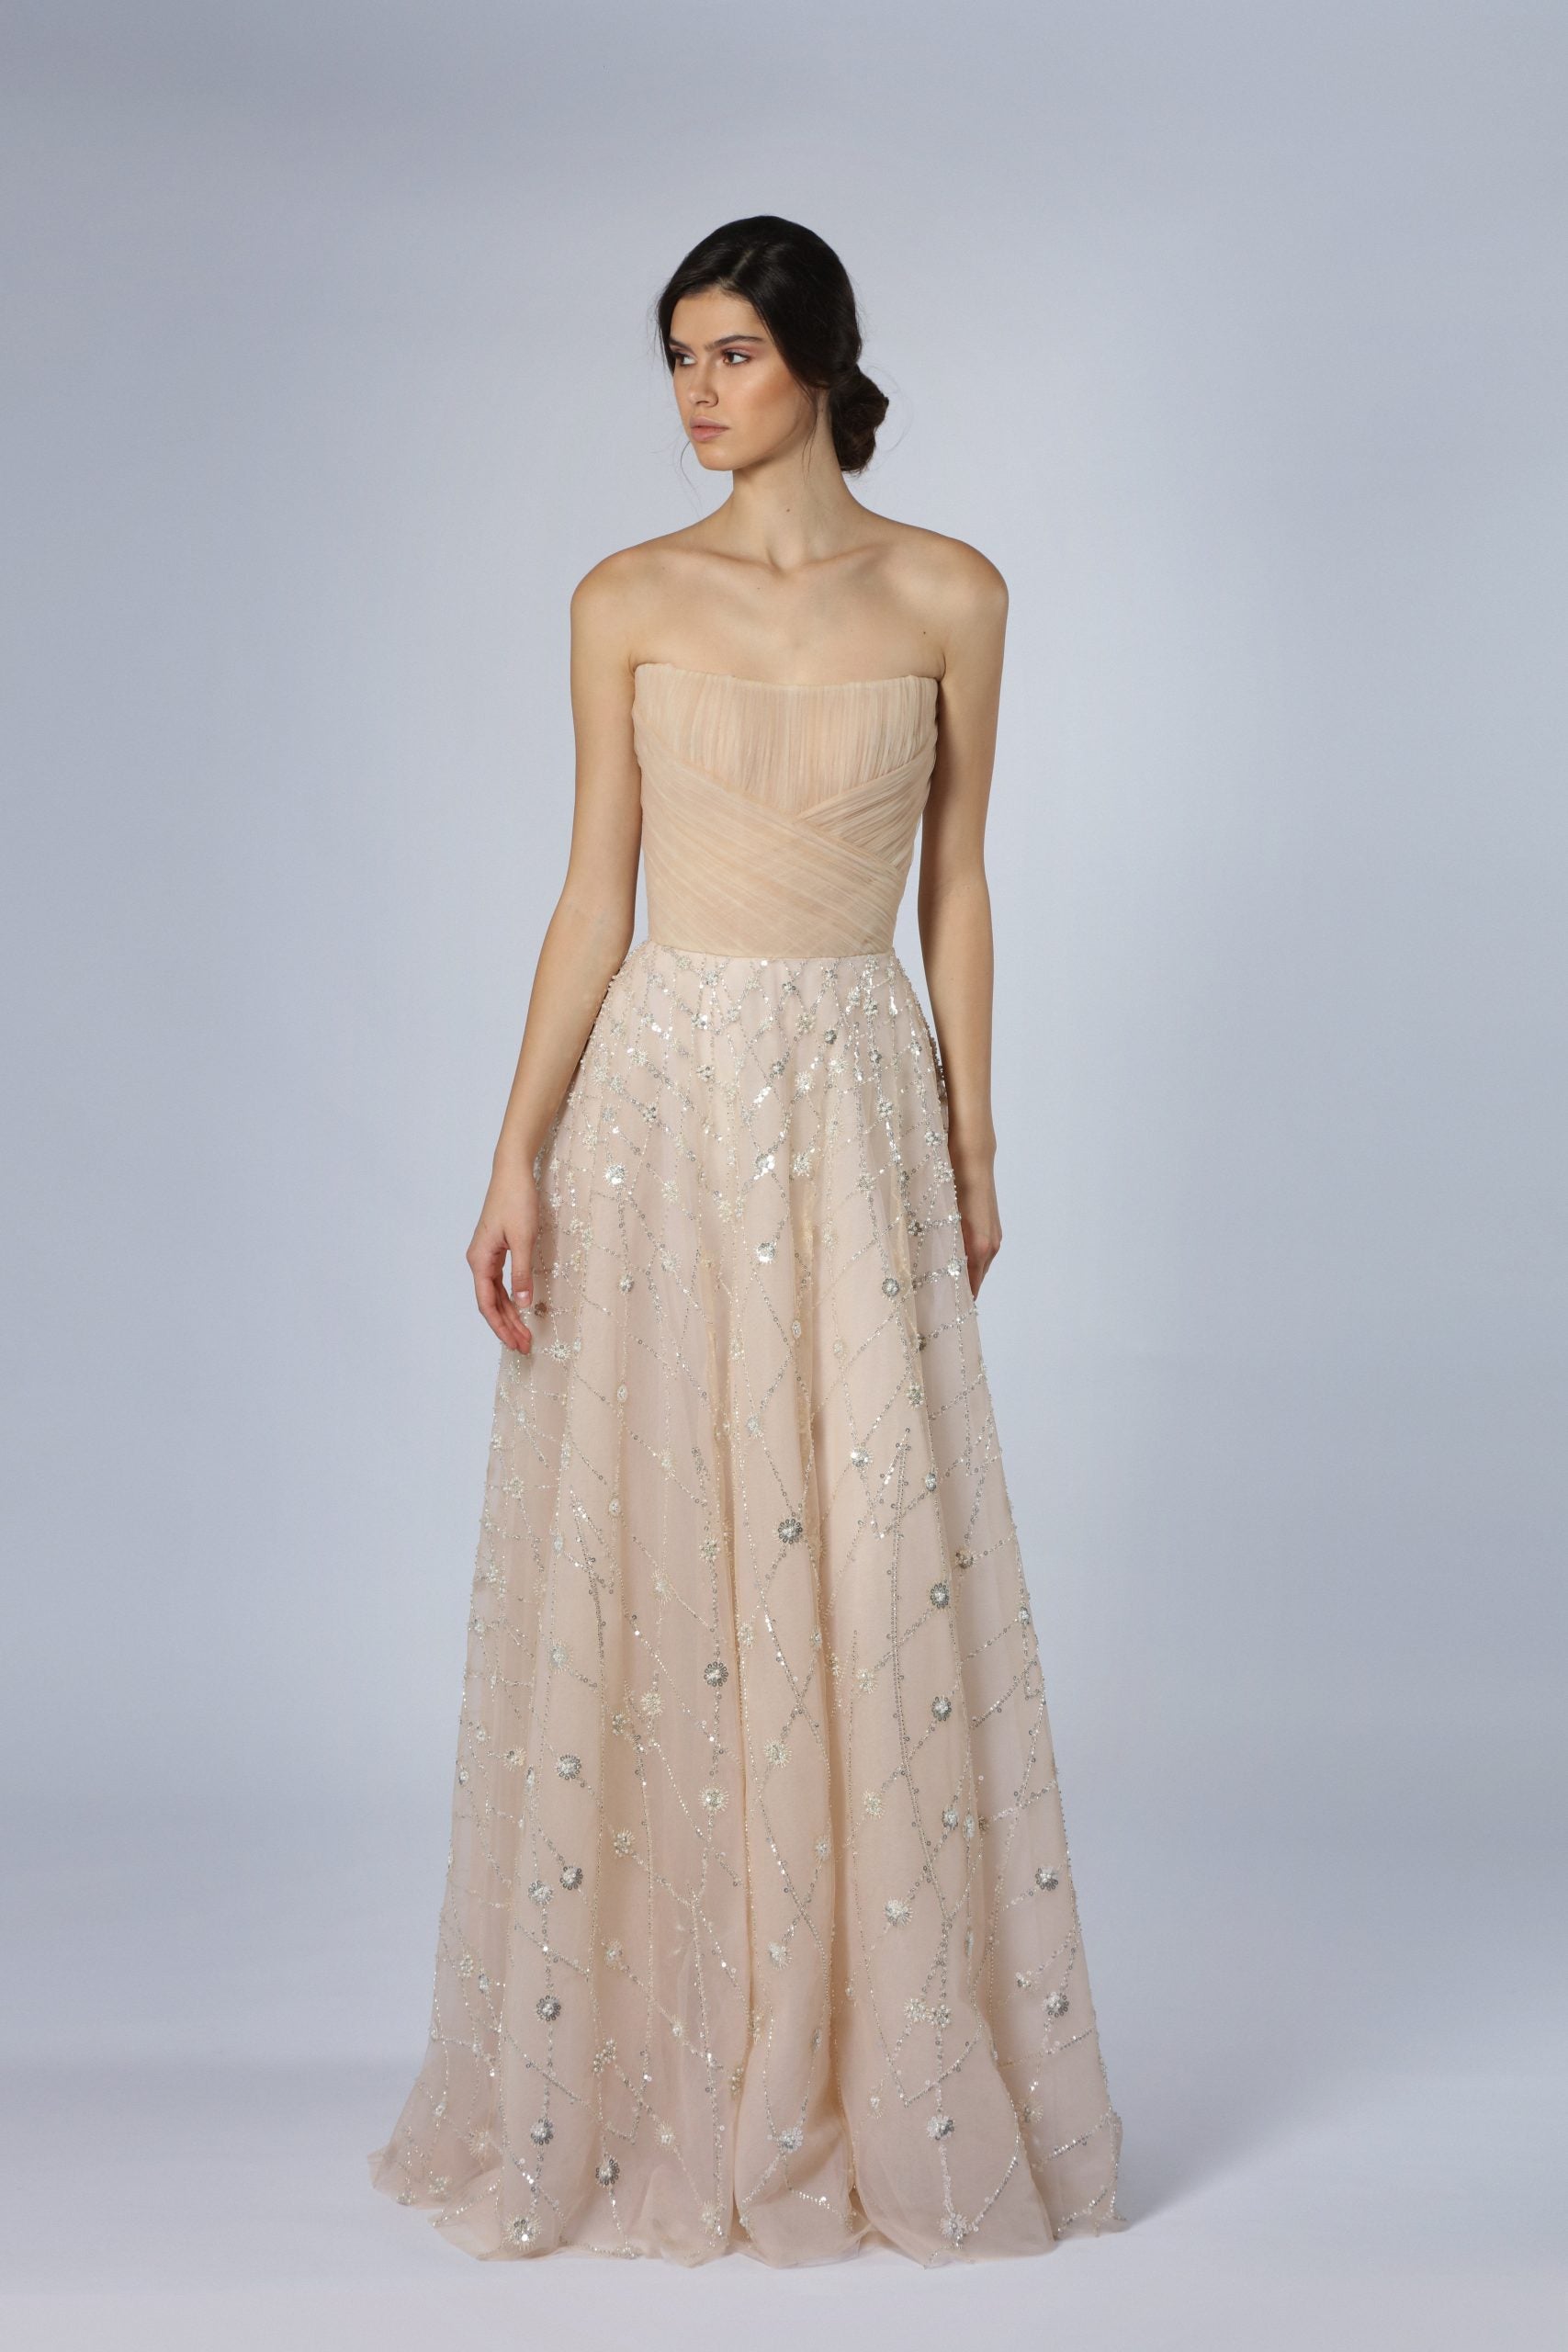 Blush A-Line Gown With Silver Embroidery by Tony Ward - Image 1